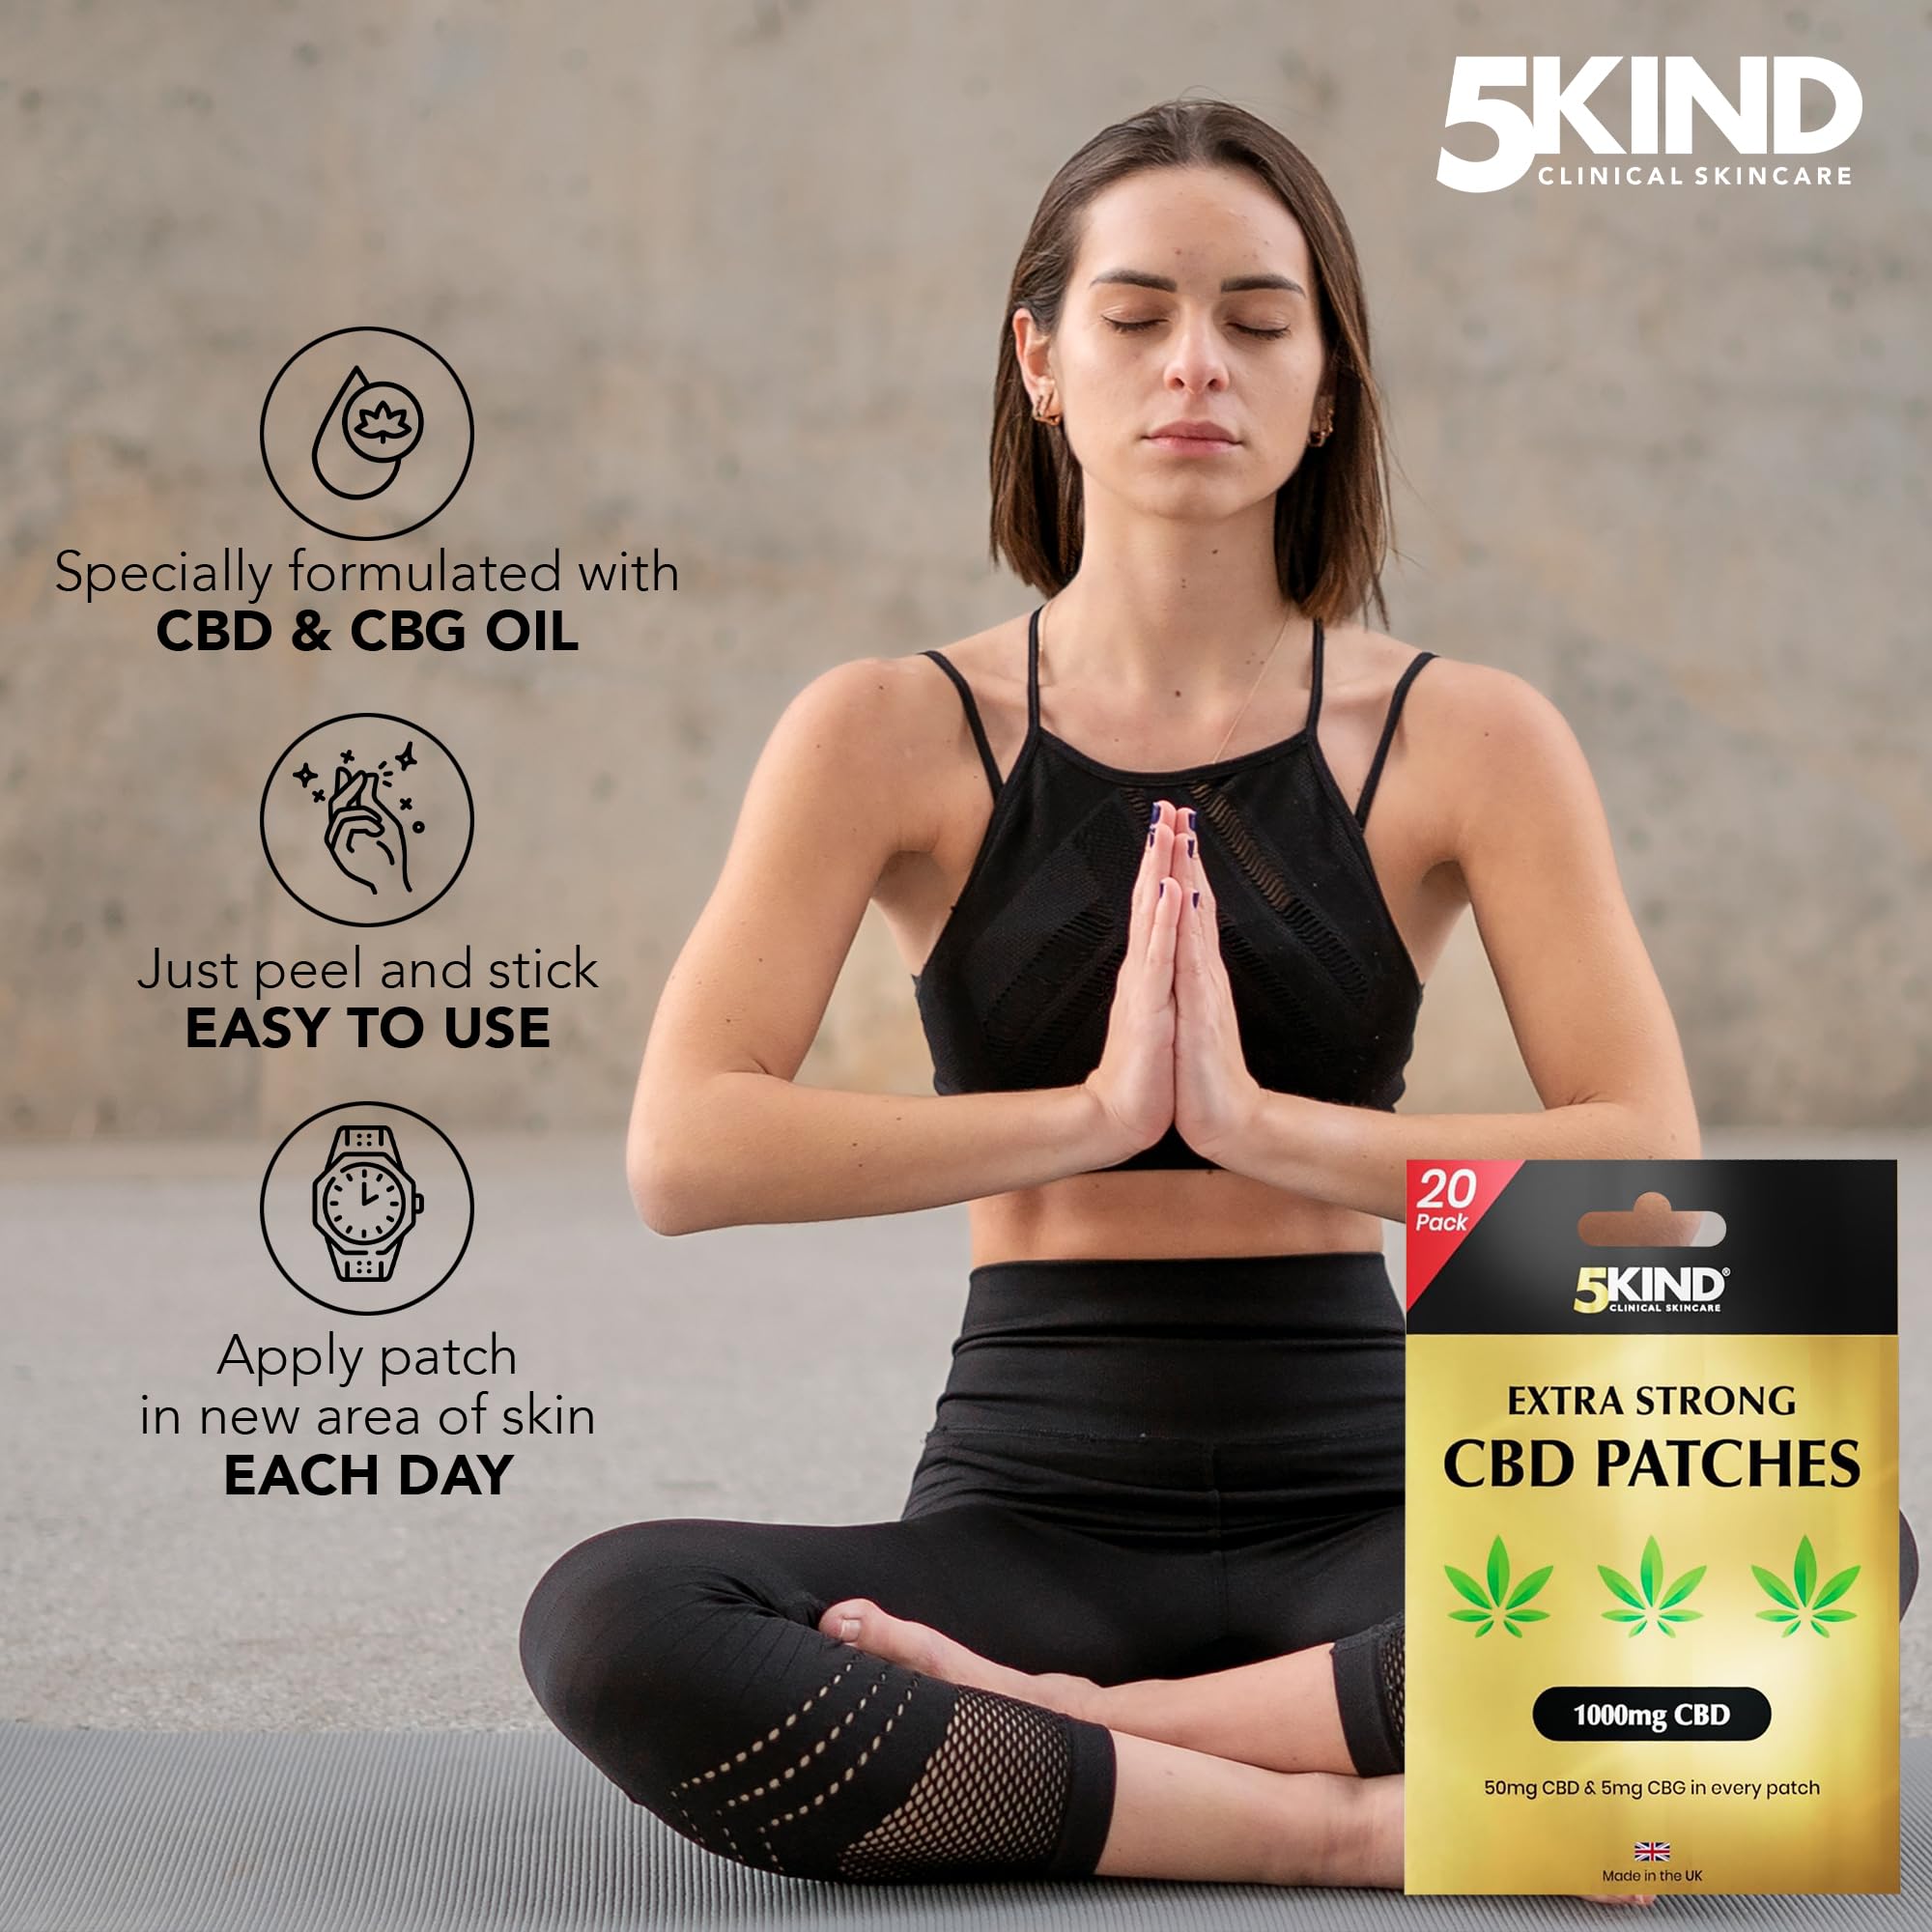 Extra Strong CBD Patches 1000mg - 50mg CBD & 5mg CBG in Every Patch - Calming Cannabidiol, Cannabigerol & Hemp Patches - Natural Patch Made in UK